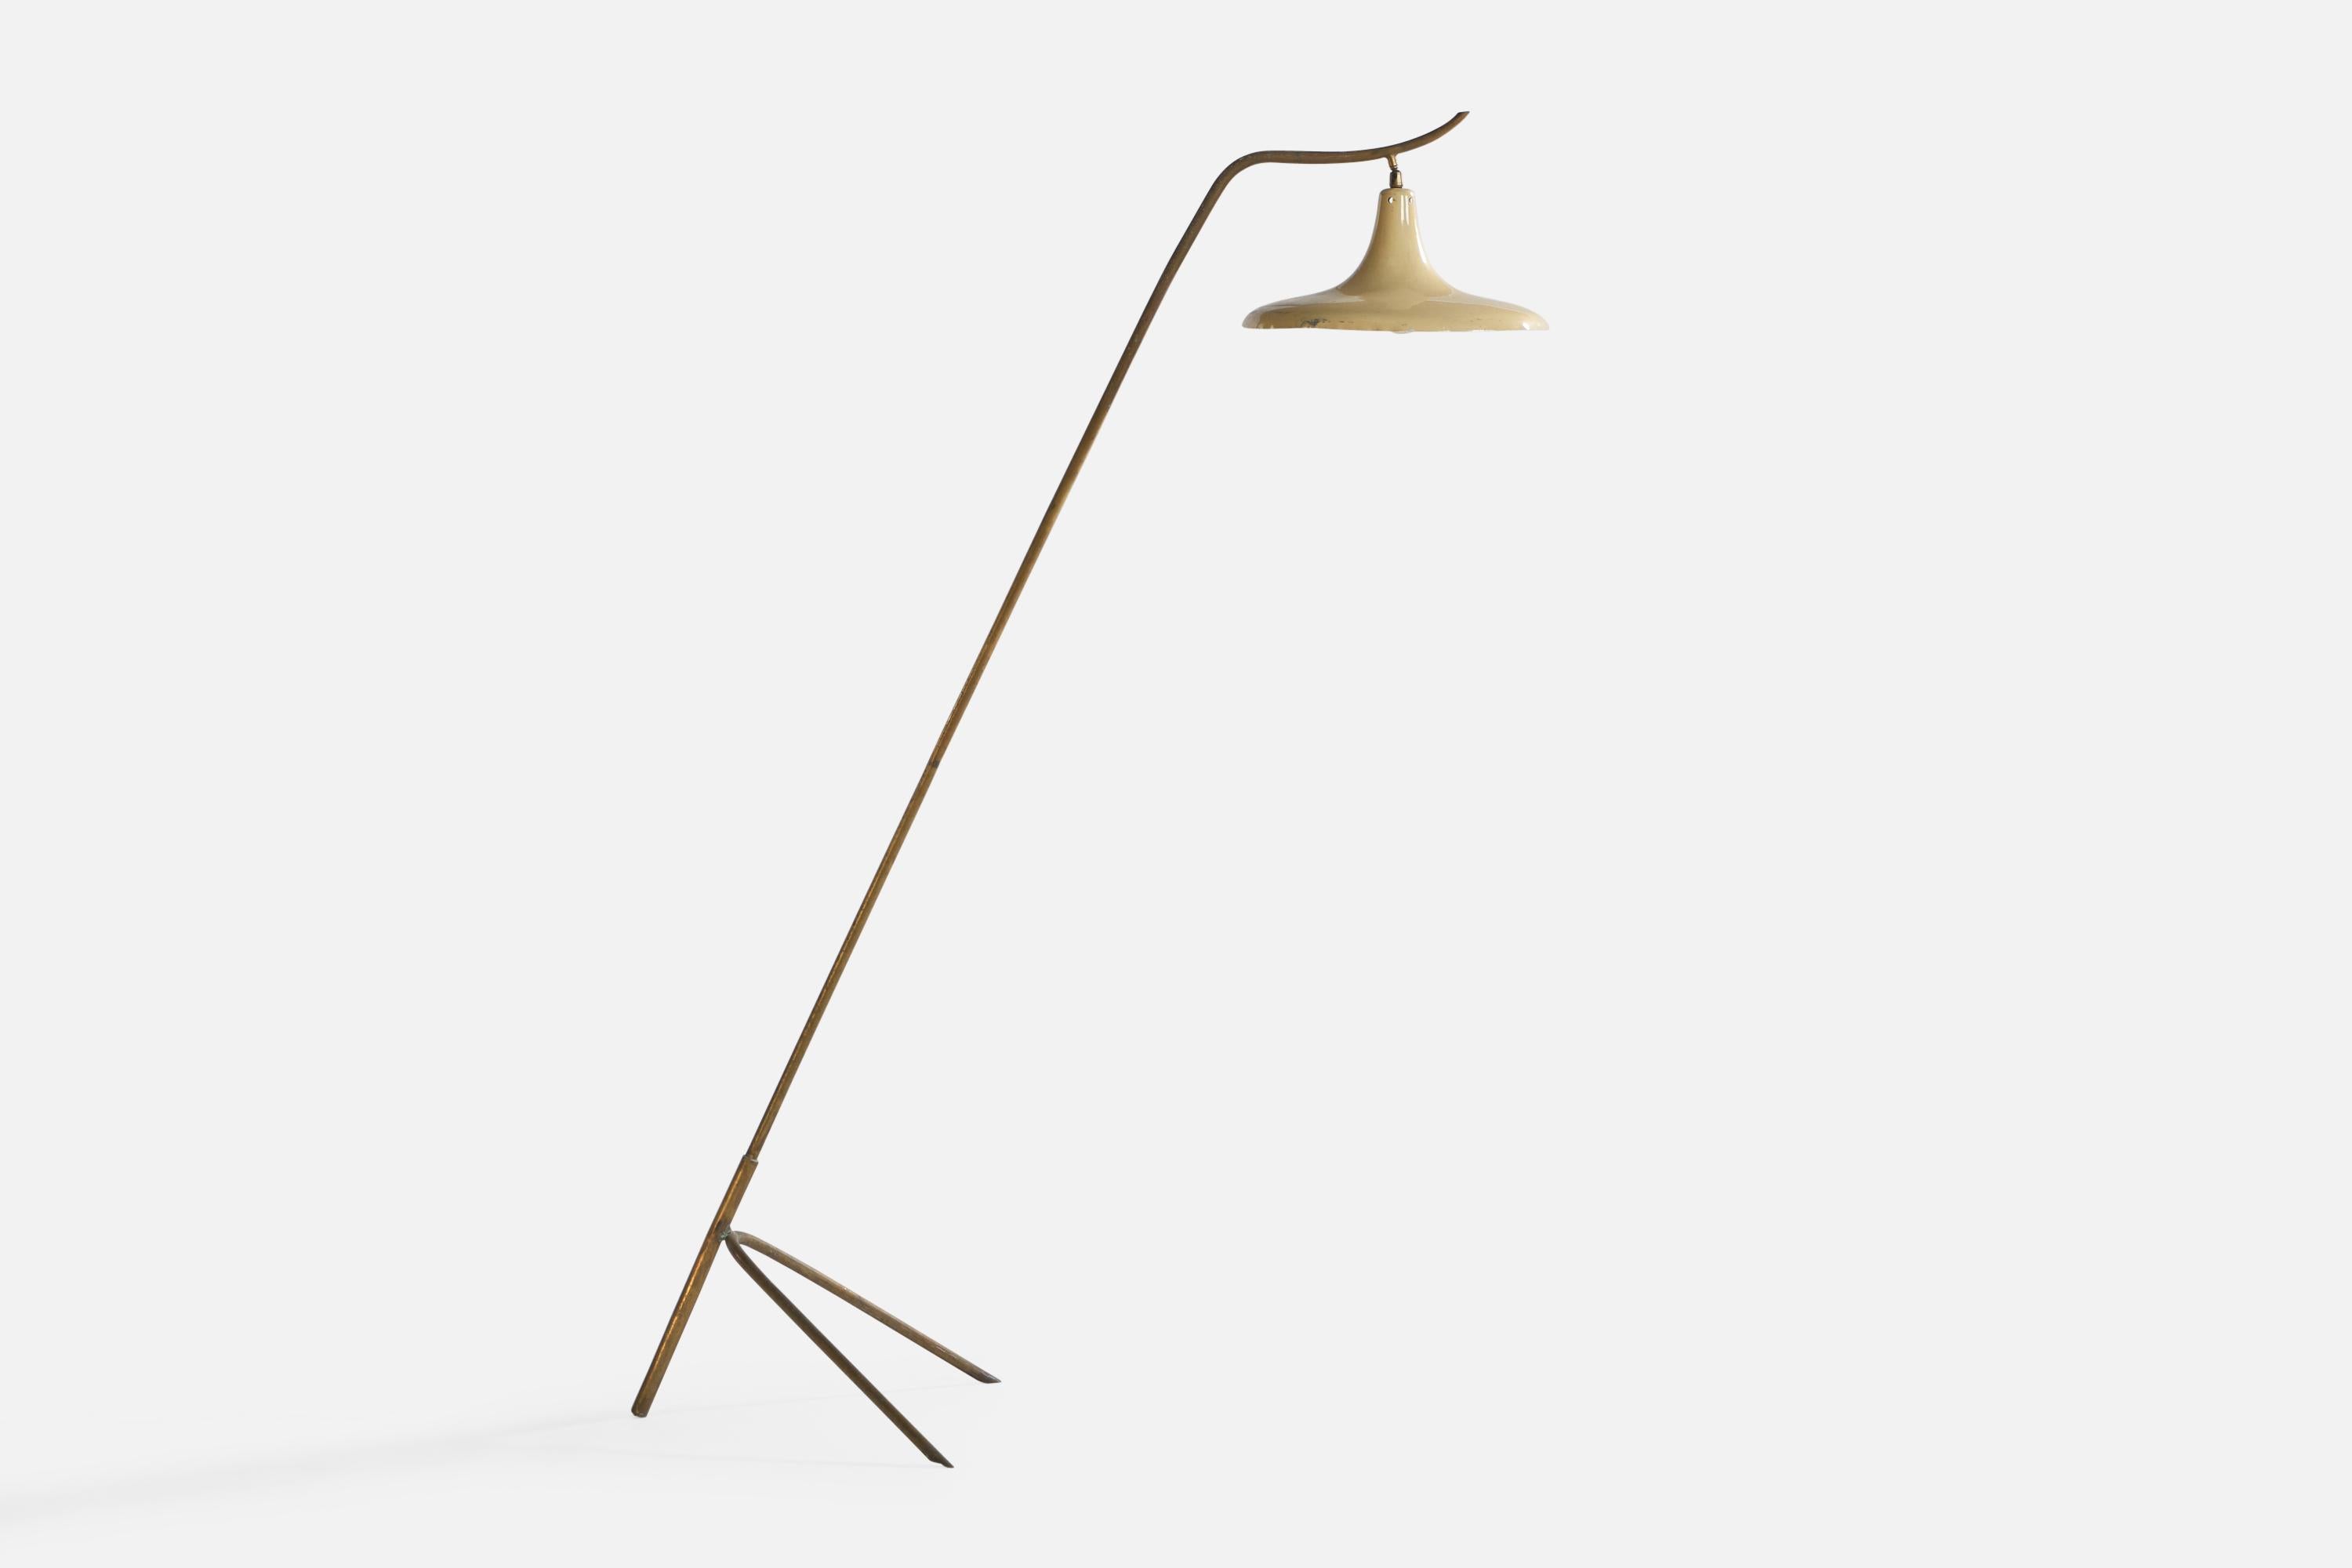 A brass and beige-glazed metal floor lamp designed and produced in Italy, c. 1940s.

Overall Dimensions (inches): 63.25” H x 22” W x 44” D. 
Bulb Specifications: E-26 Bulb
Number of Sockets: 1
All lighting will be converted for US usage. We are